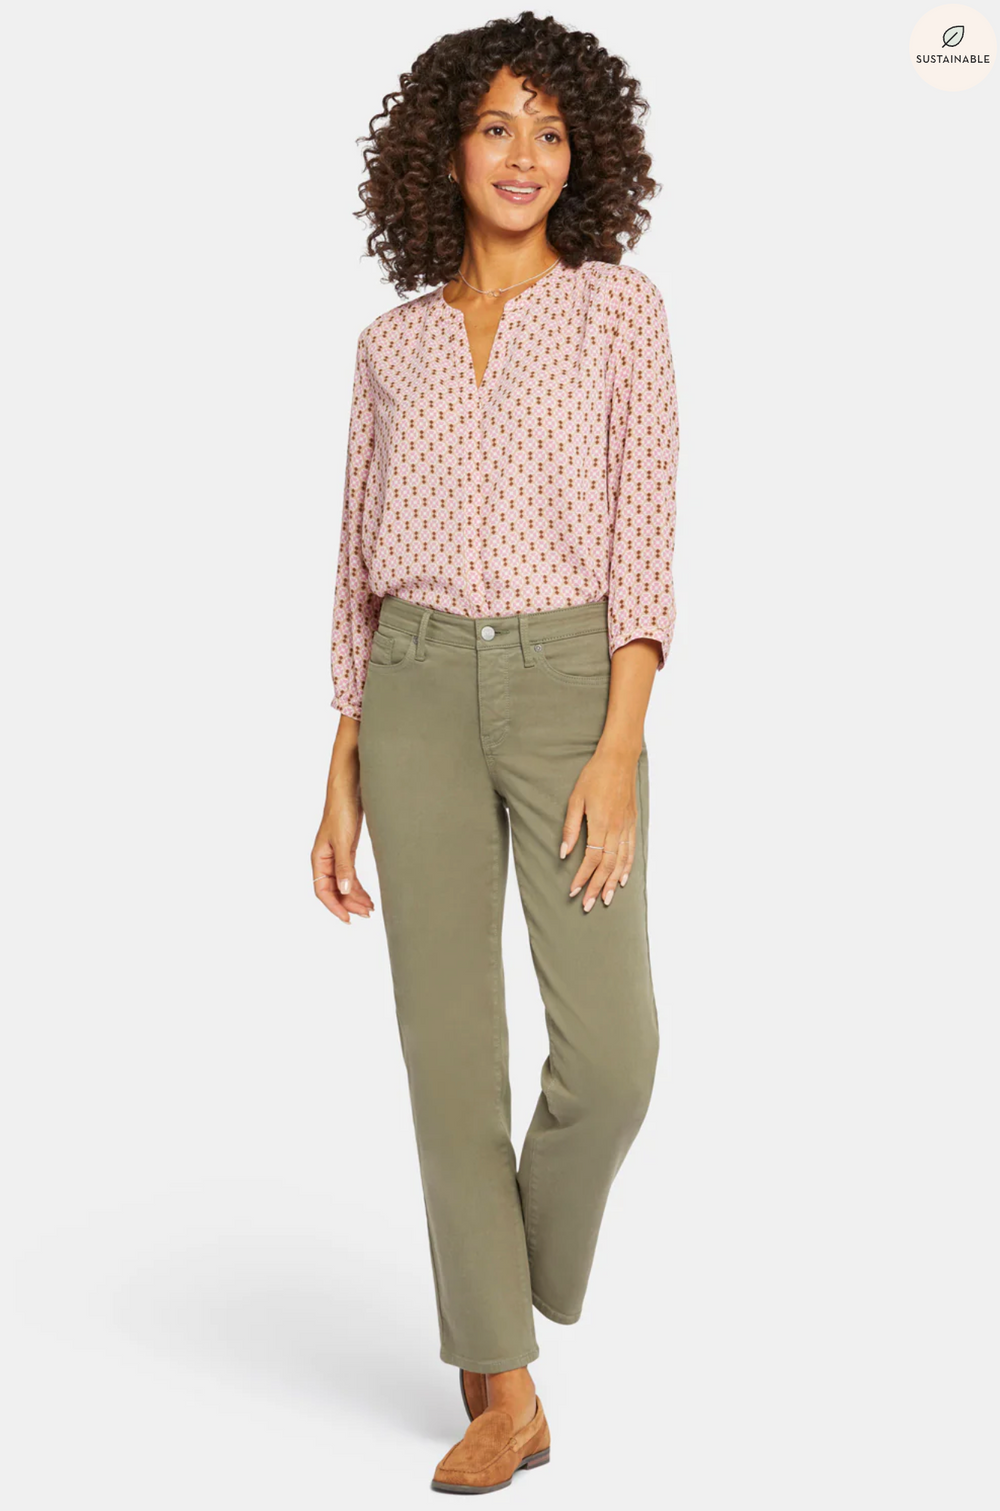 NYDJ relaxed slender jeans, earth friendly (mid-rise zip) Avocado